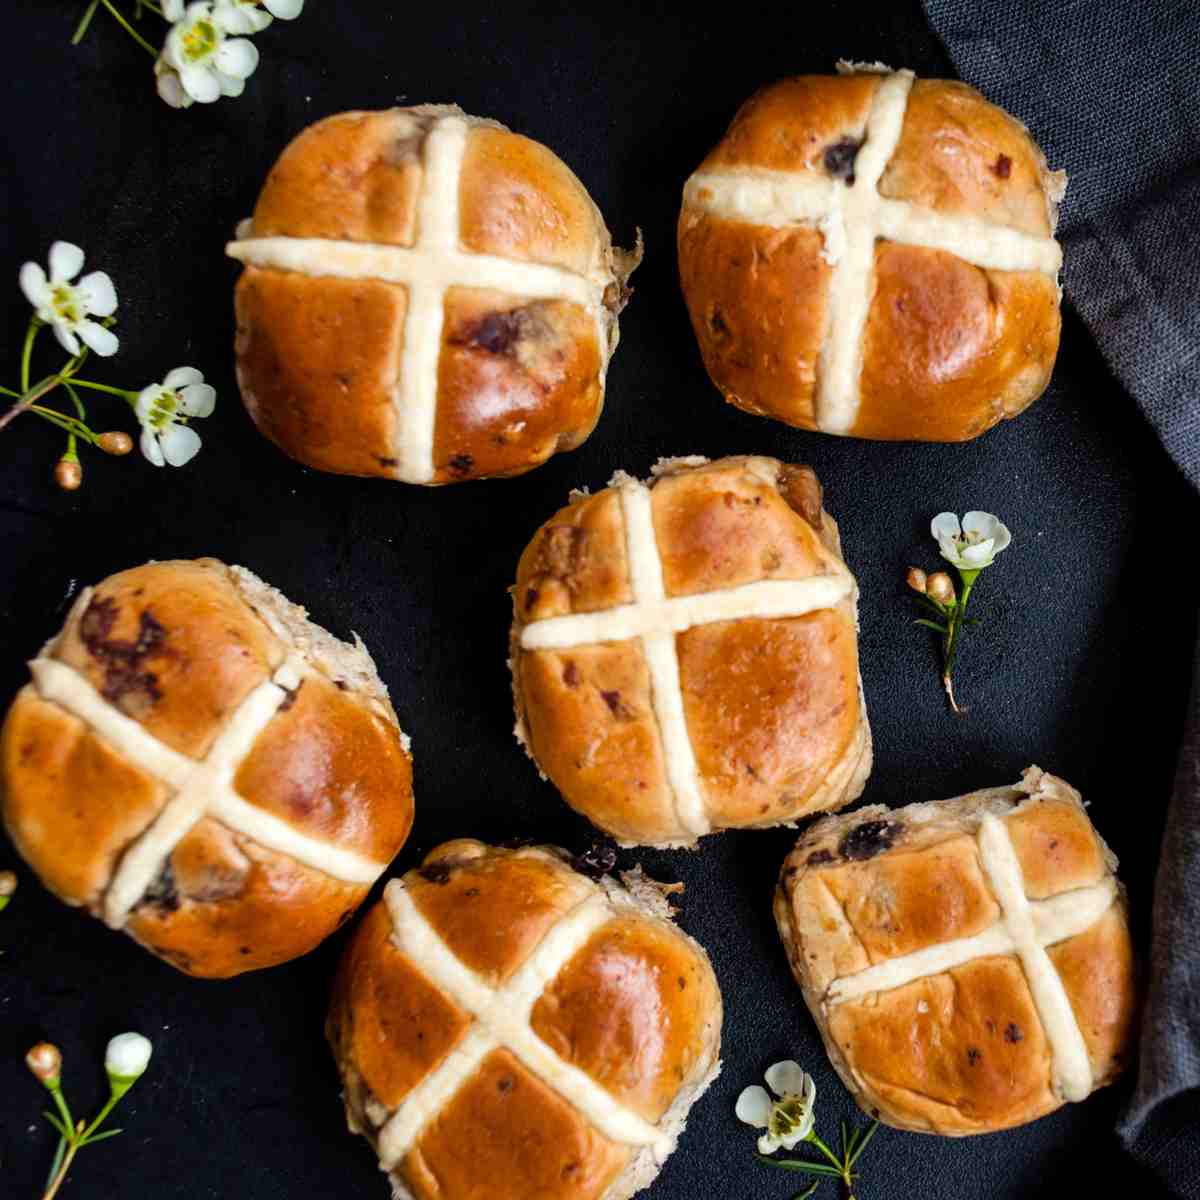 Six hot cross buns on a black napkin with tiny white flowers surrounding them, the cross prominently displayed on each of the Easter pastries symbolizing the religious hot cross buns history.